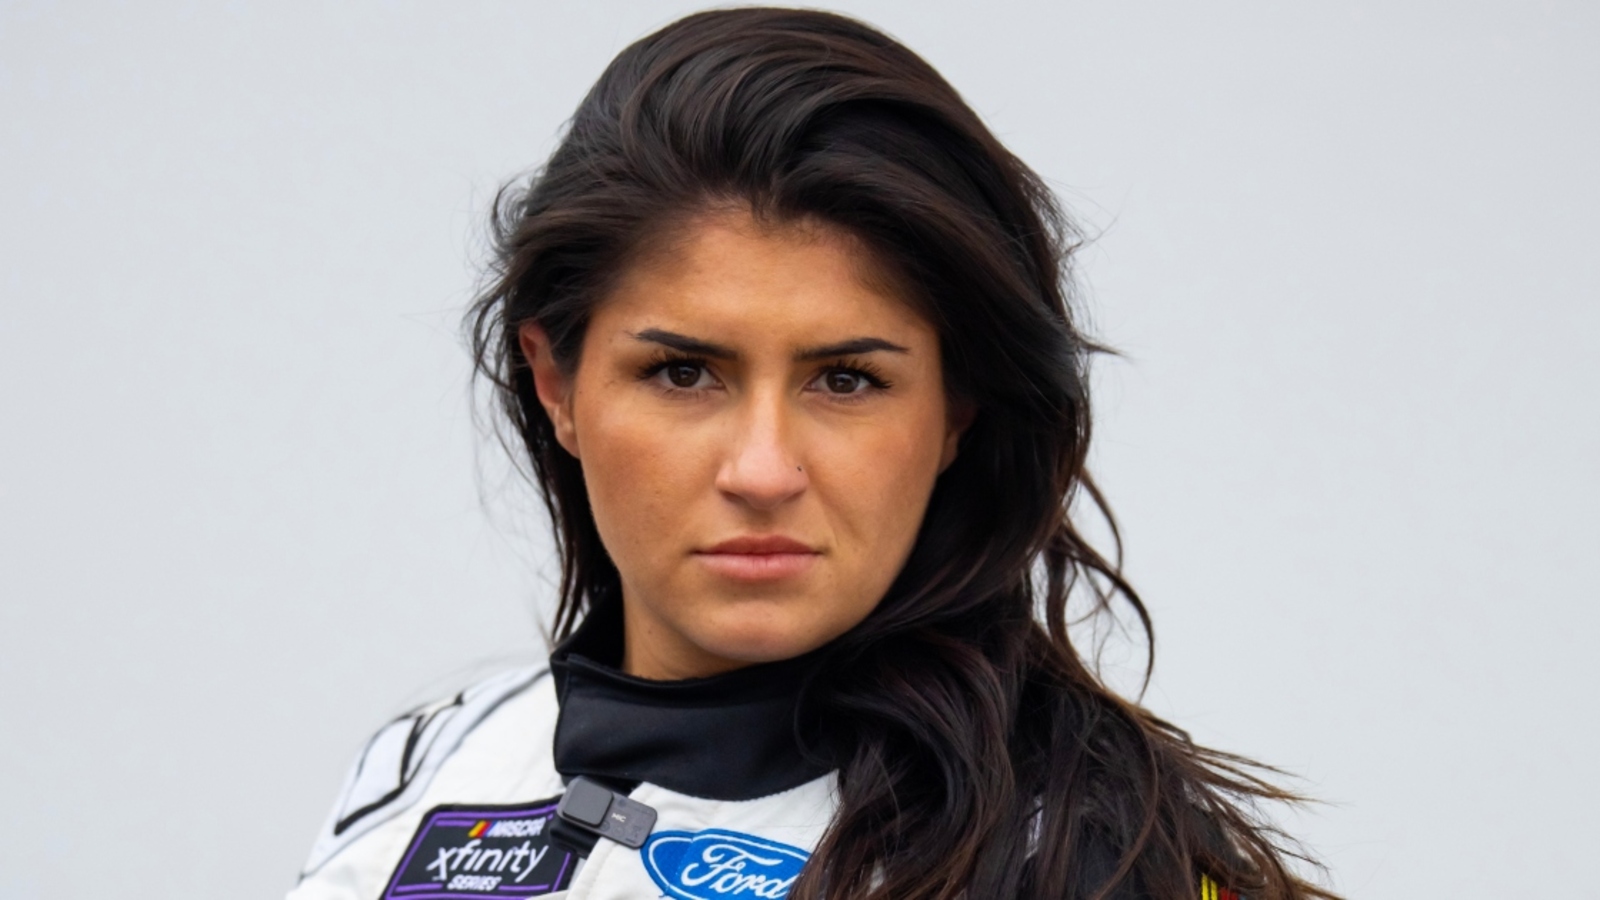 Hailie Deegan explains what led to her Darlington wreck ‘before everyone jumps to conclusions’